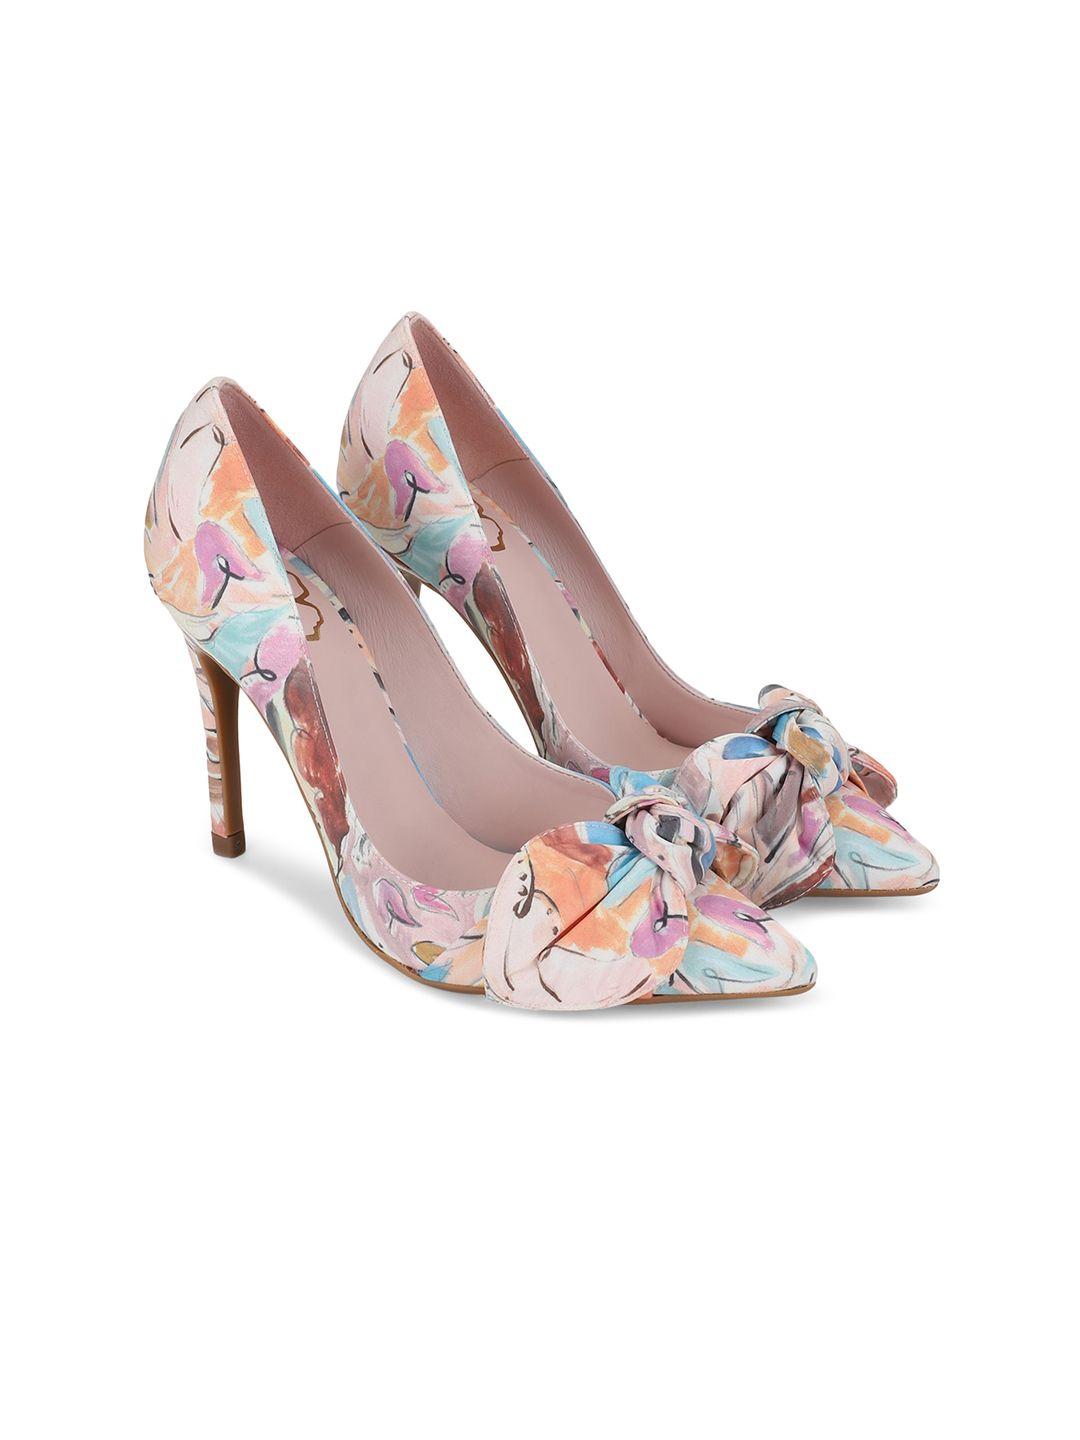 ted baker beige & orange printed stiletto pumps with bows